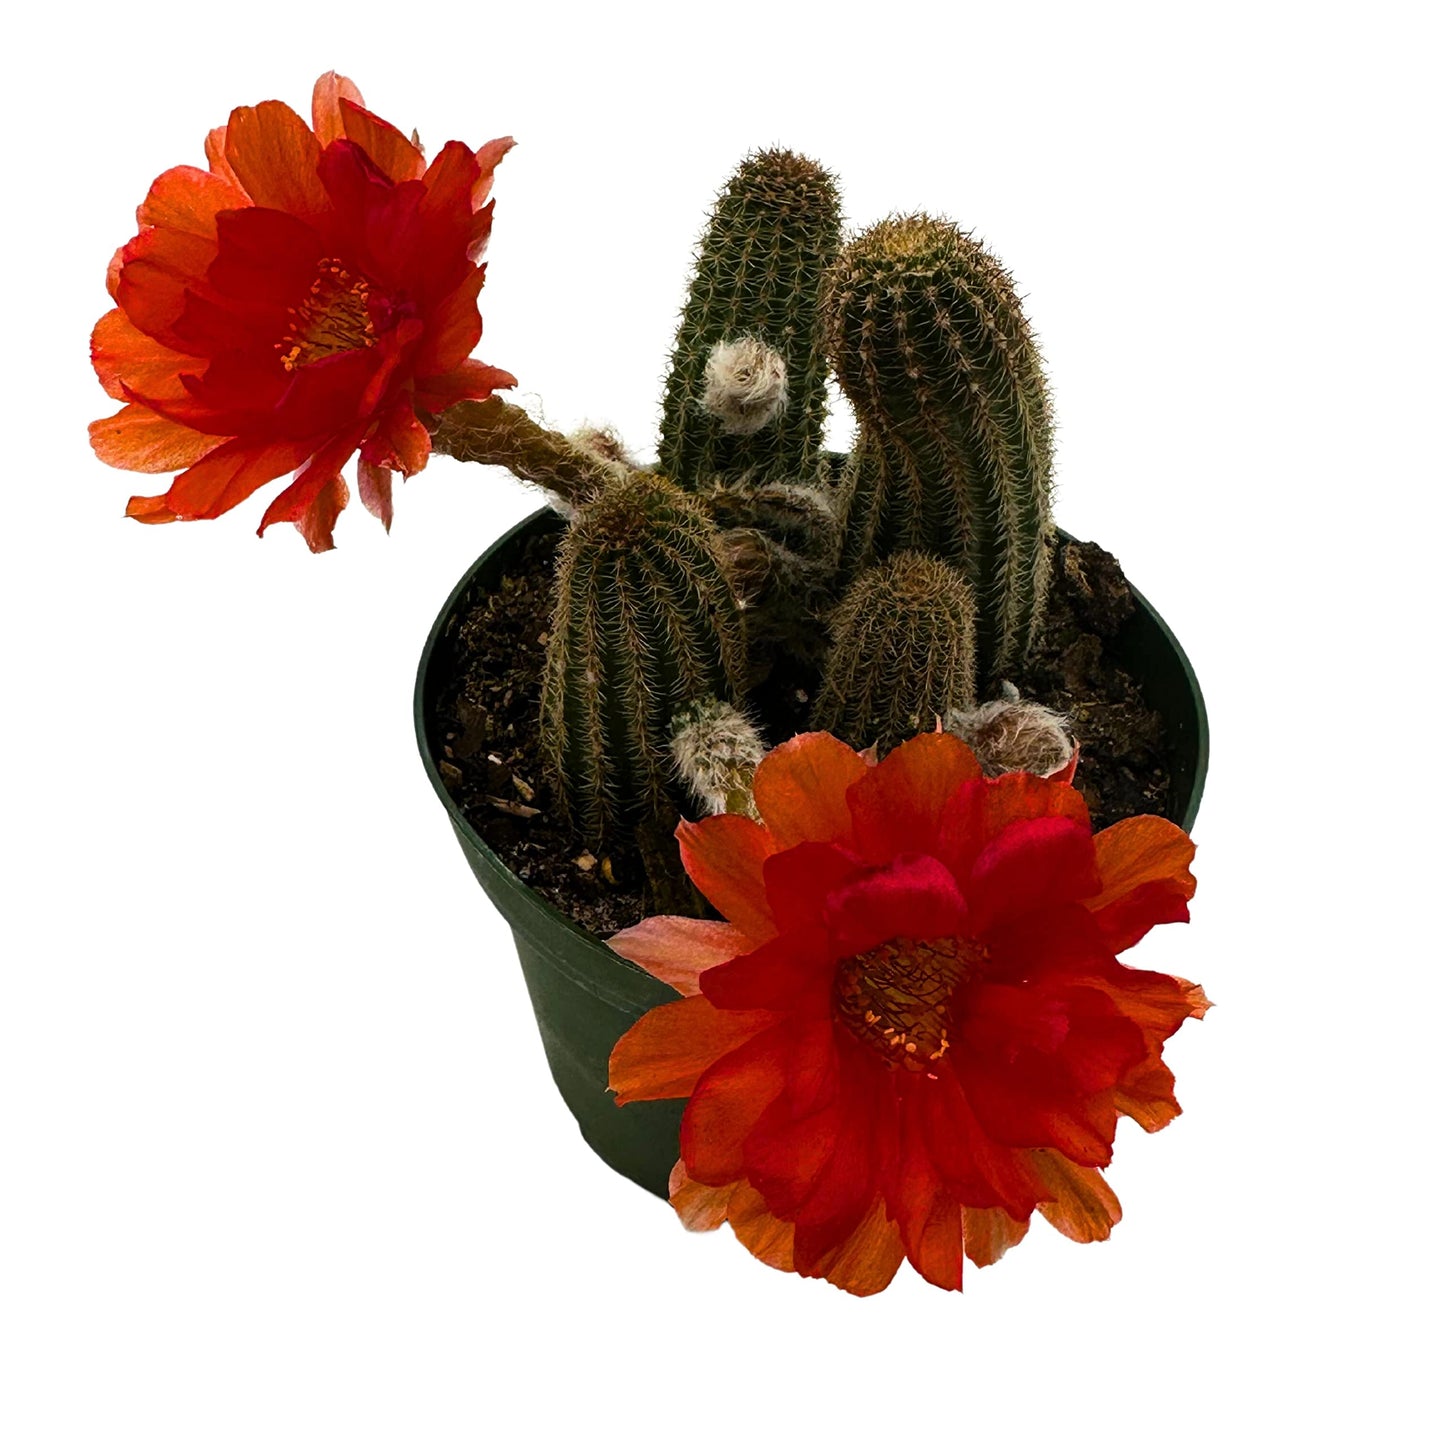 Peanut Cactus, Echinopsis chamaecereus, Beautiful Healthy Well Rooted Starter Plant in 4 inch Pot